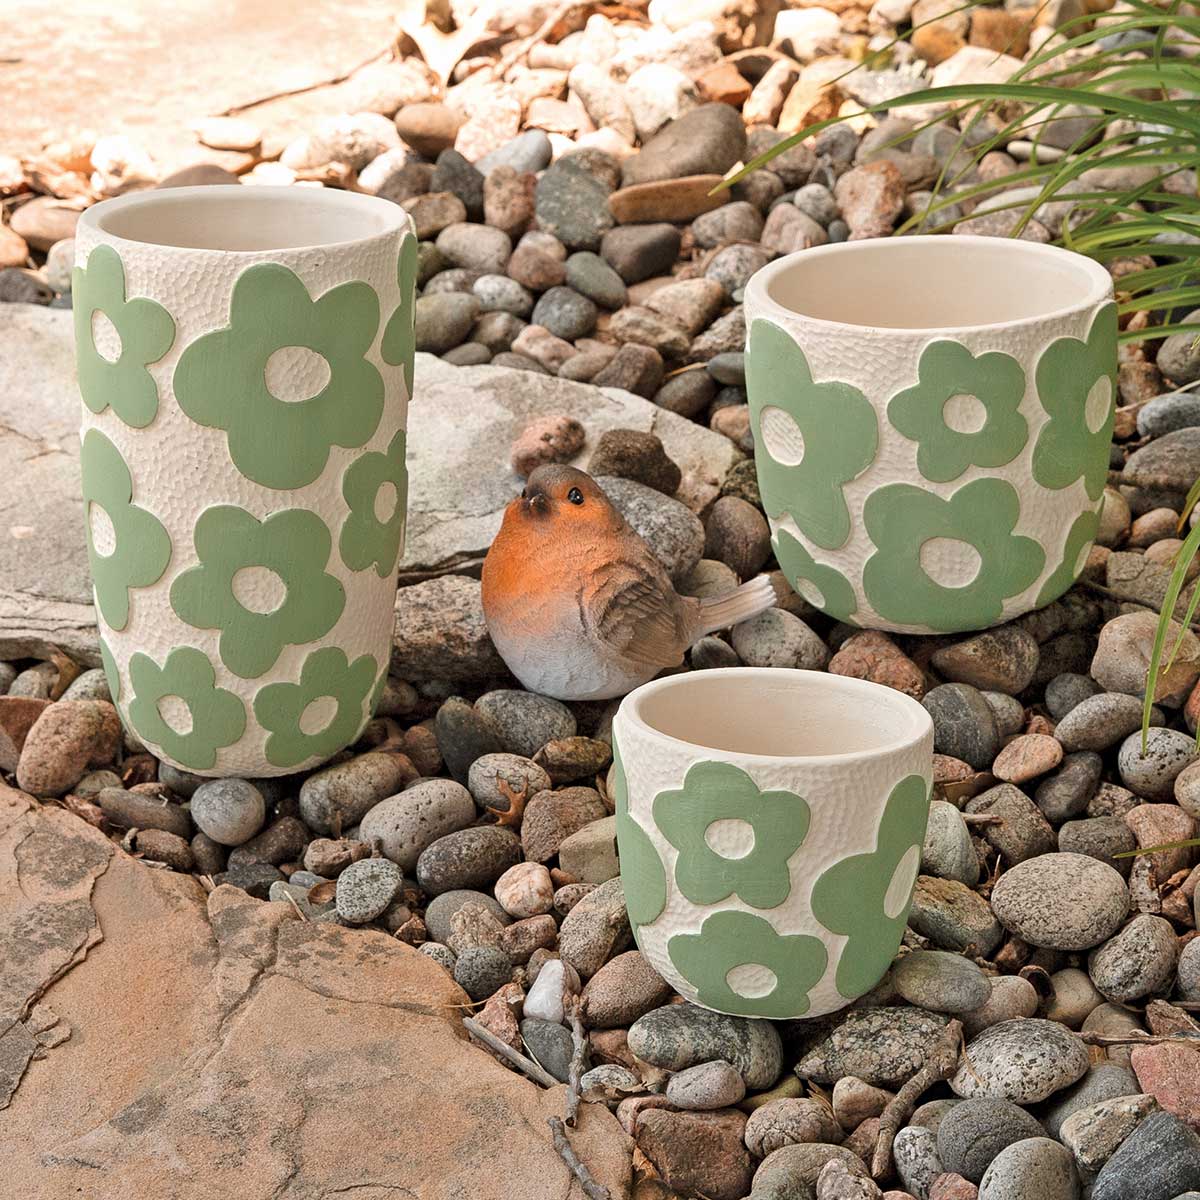 POT FLOWER SMALL 4.25IN X 4IN WHITE/GREEN CONCRETE - Click Image to Close